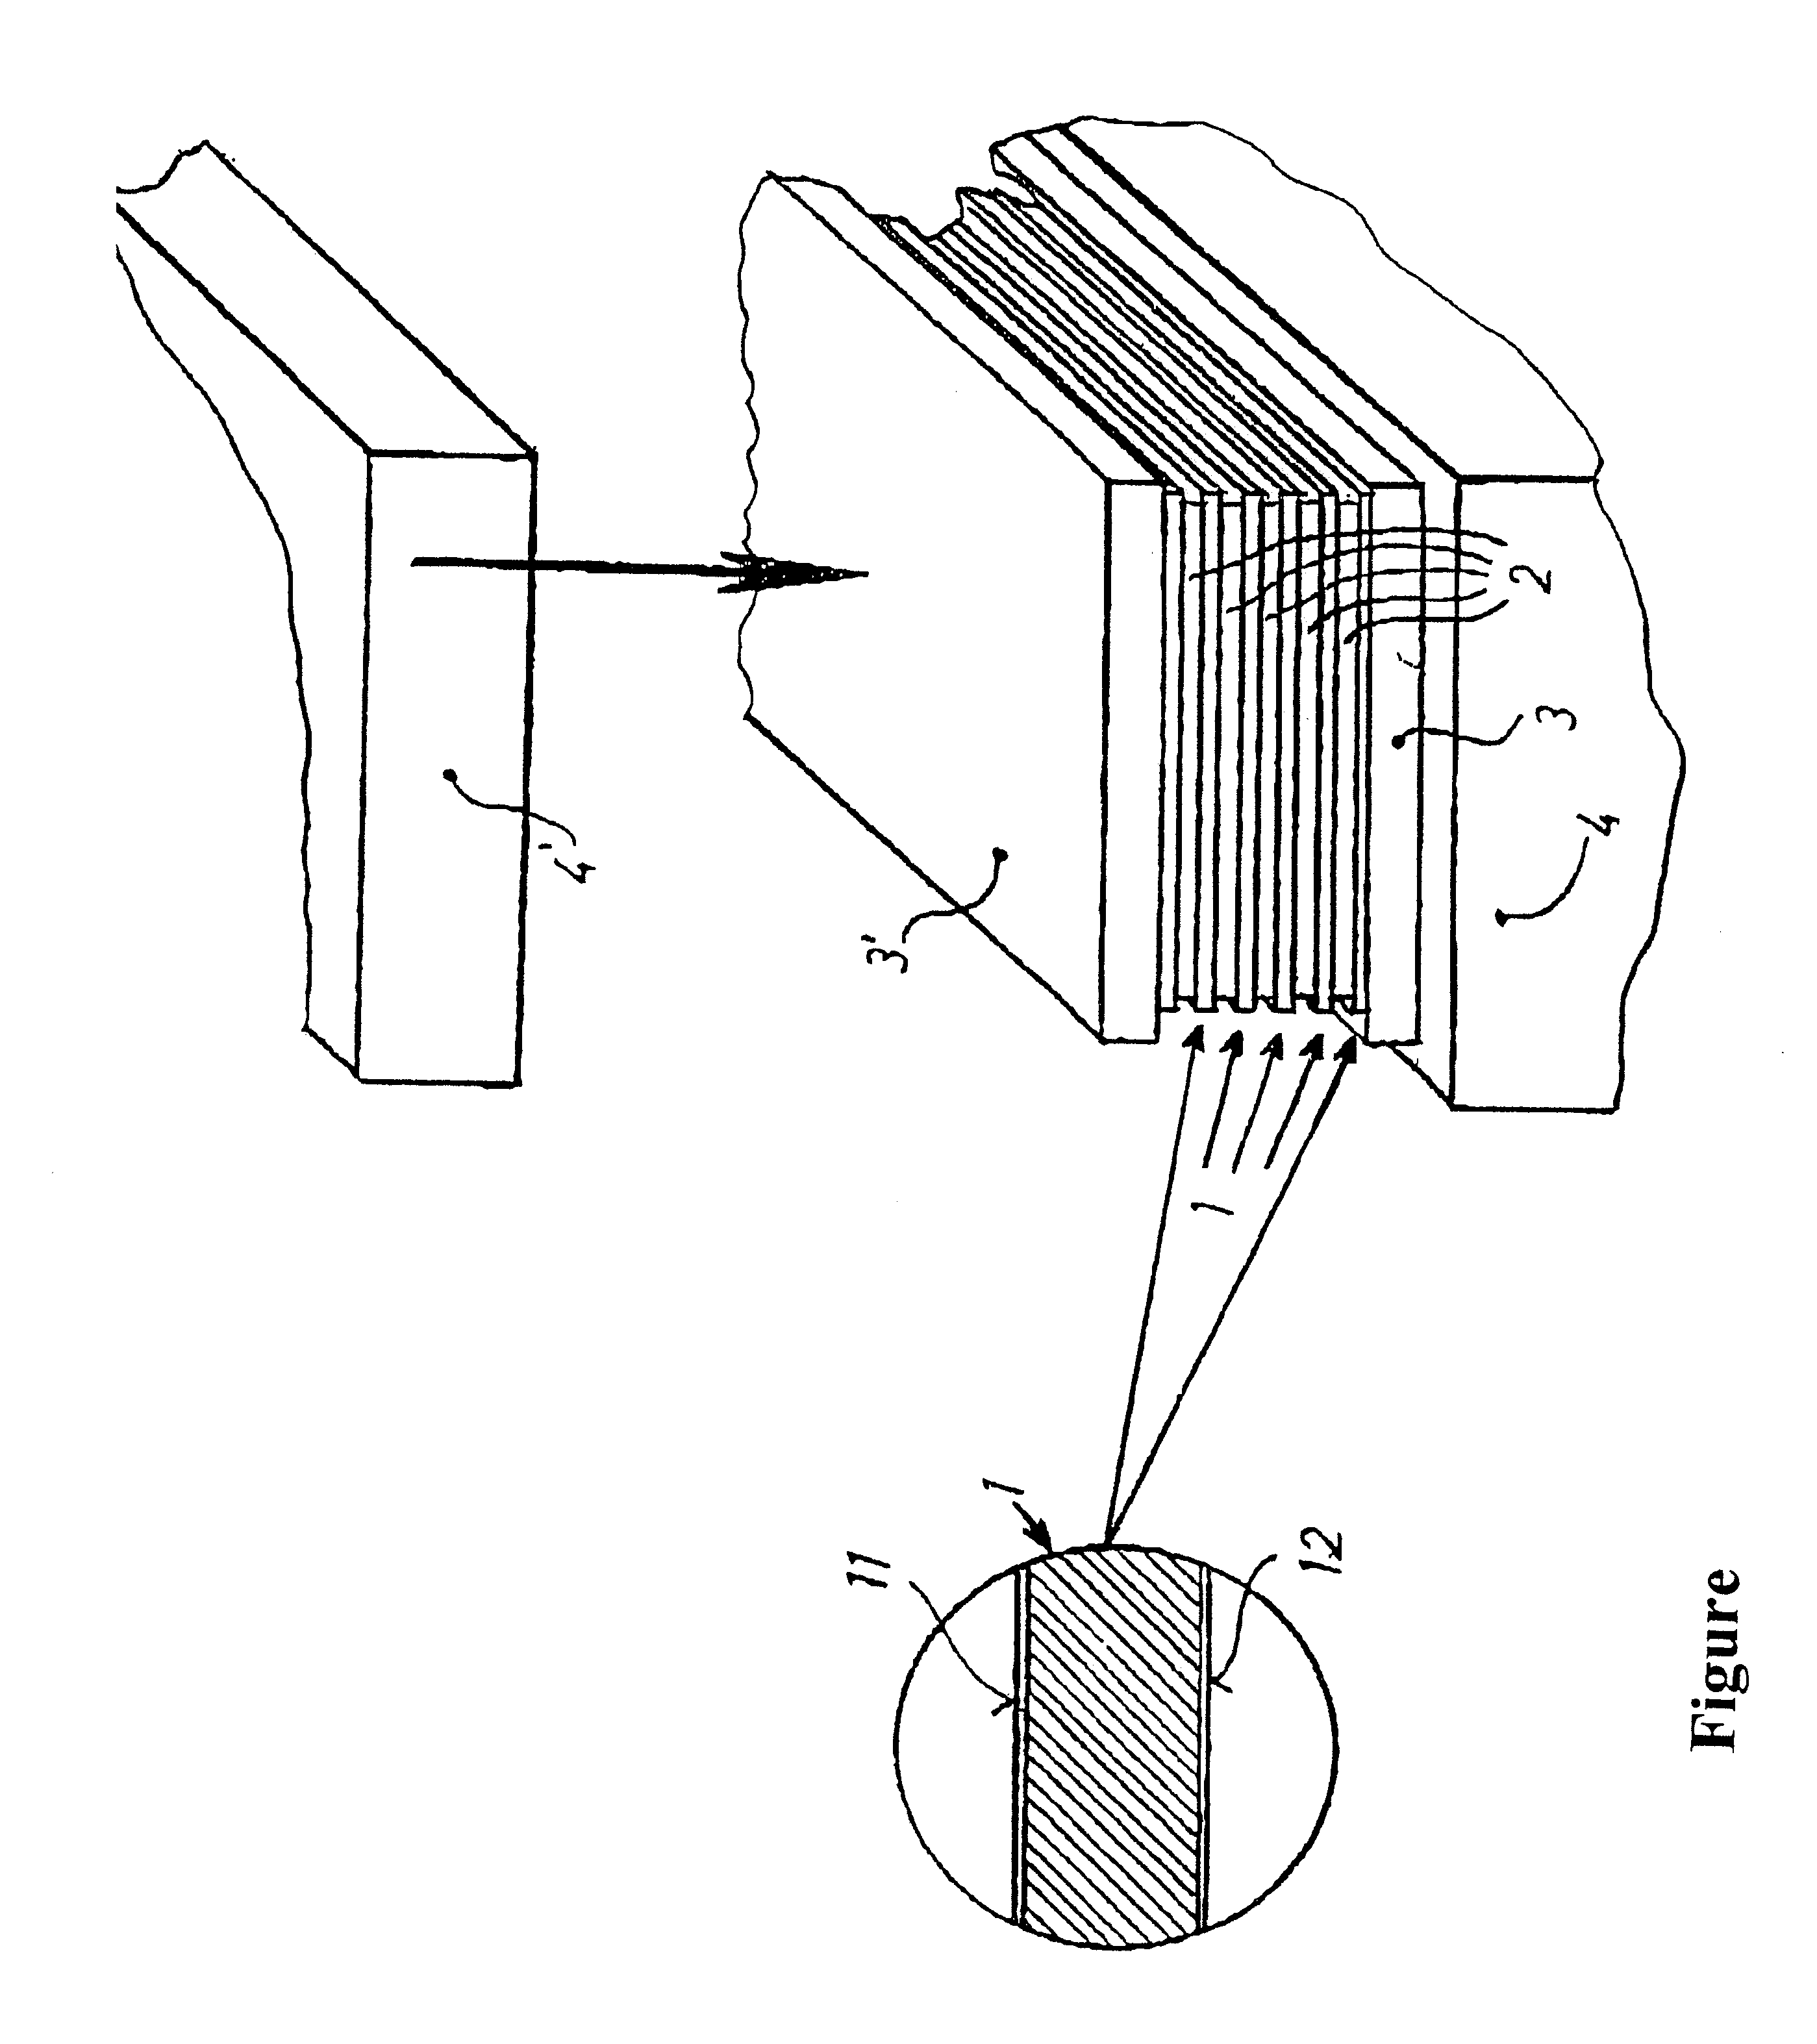 Plate-shaped compression mold, process for producing the same and process for making laminate therewith